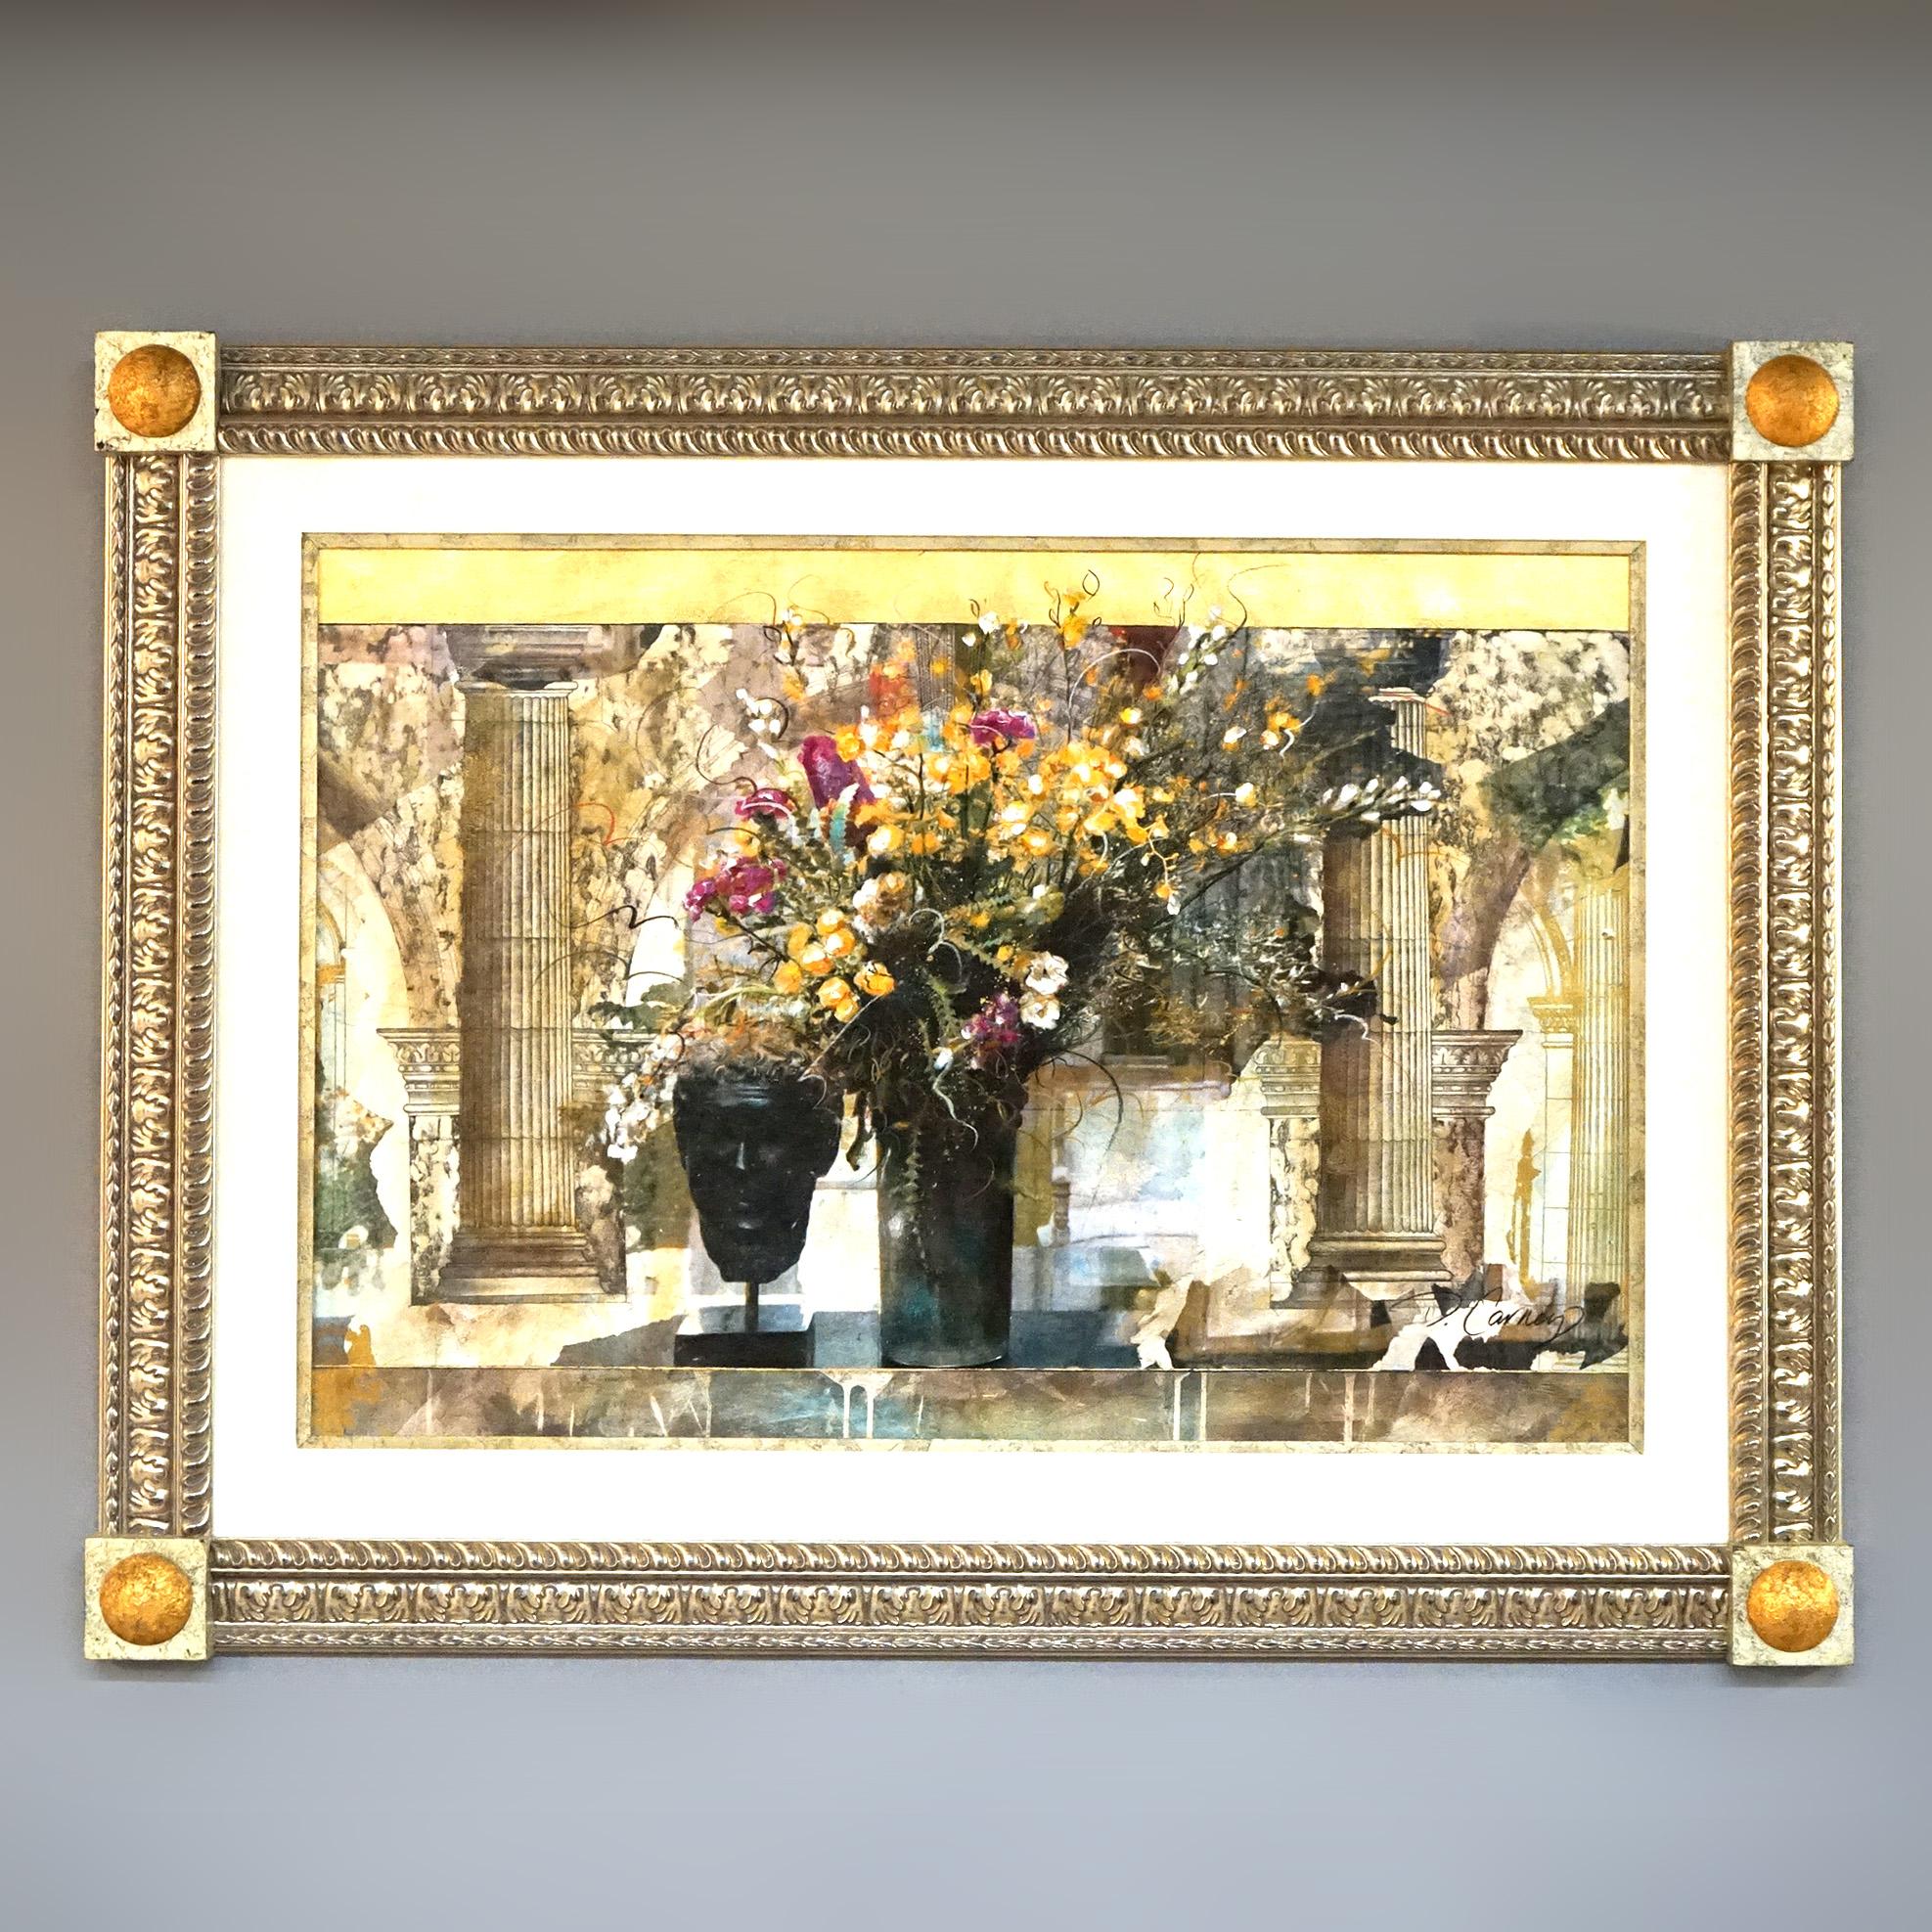 A large Grecian interior print with floral and architectural elements, framed, 20th century 

Measures - 43.5